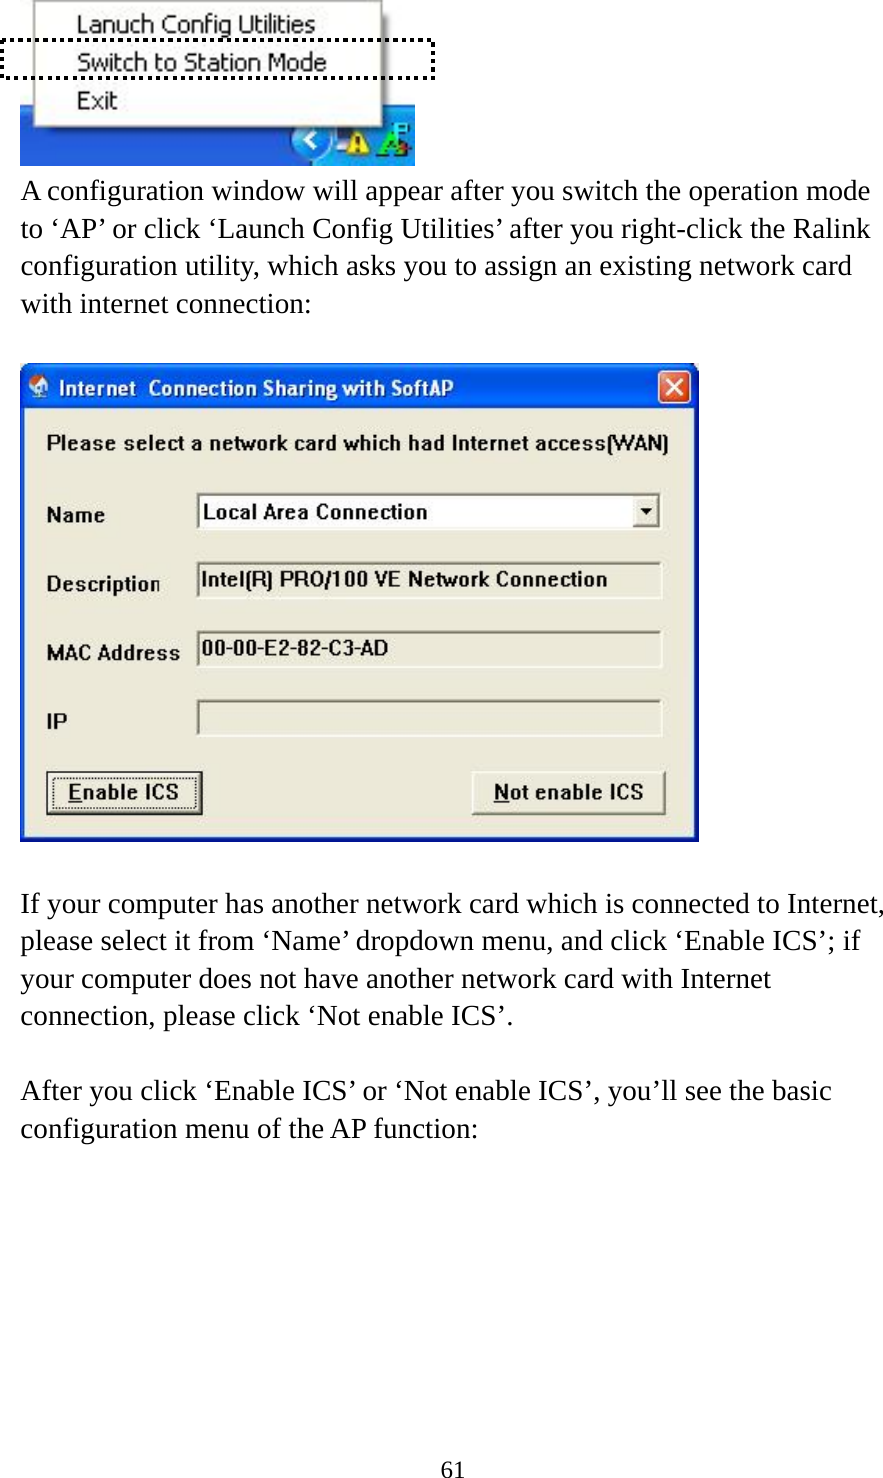  61 A configuration window will appear after you switch the operation mode to ‘AP’ or click ‘Launch Config Utilities’ after you right-click the Ralink configuration utility, which asks you to assign an existing network card with internet connection:    If your computer has another network card which is connected to Internet, please select it from ‘Name’ dropdown menu, and click ‘Enable ICS’; if your computer does not have another network card with Internet connection, please click ‘Not enable ICS’.      After you click ‘Enable ICS’ or ‘Not enable ICS’, you’ll see the basic configuration menu of the AP function:  